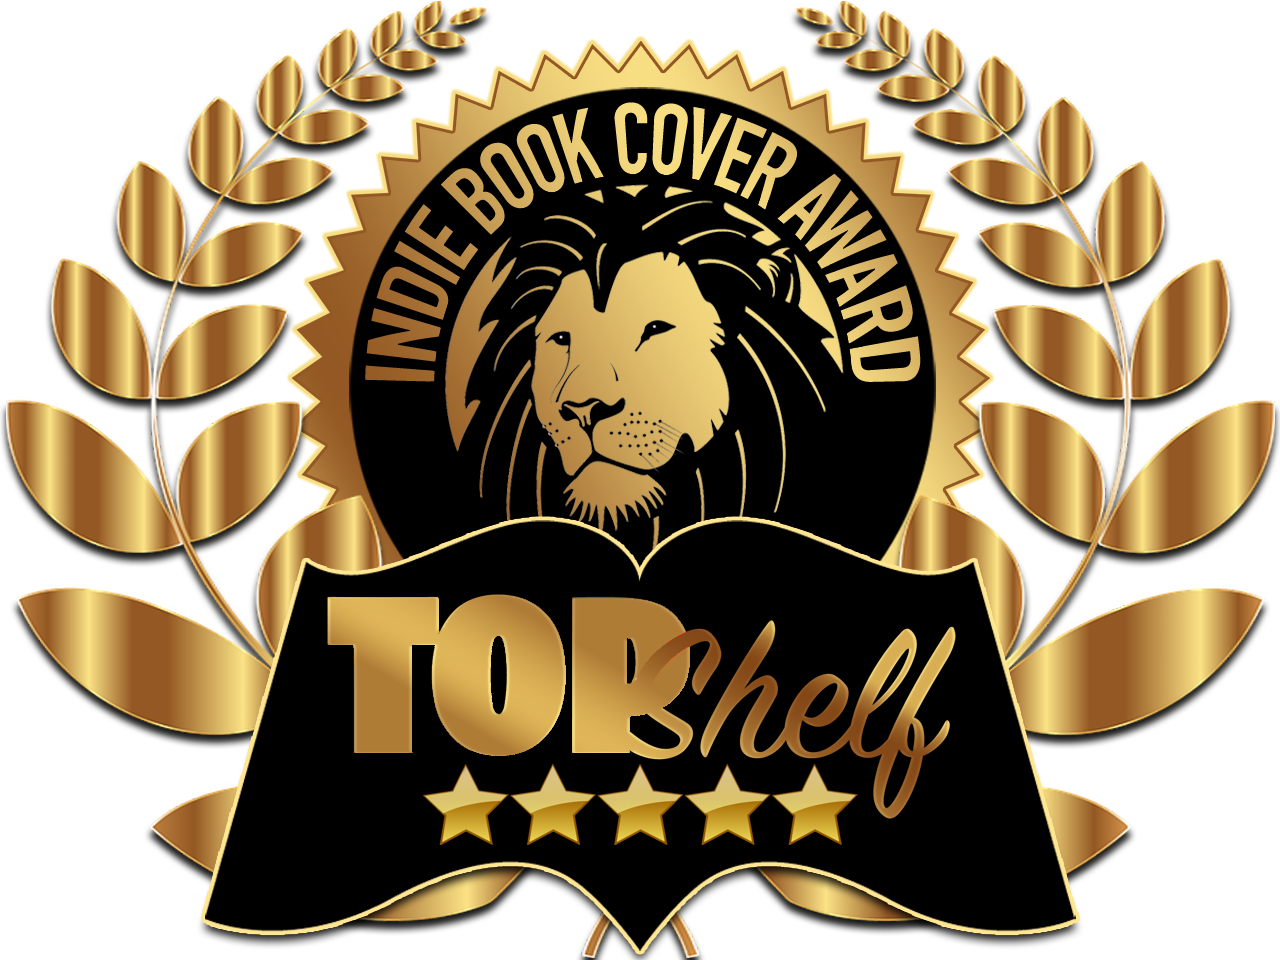 Topshelf indie cover awards. Prize clipart book award